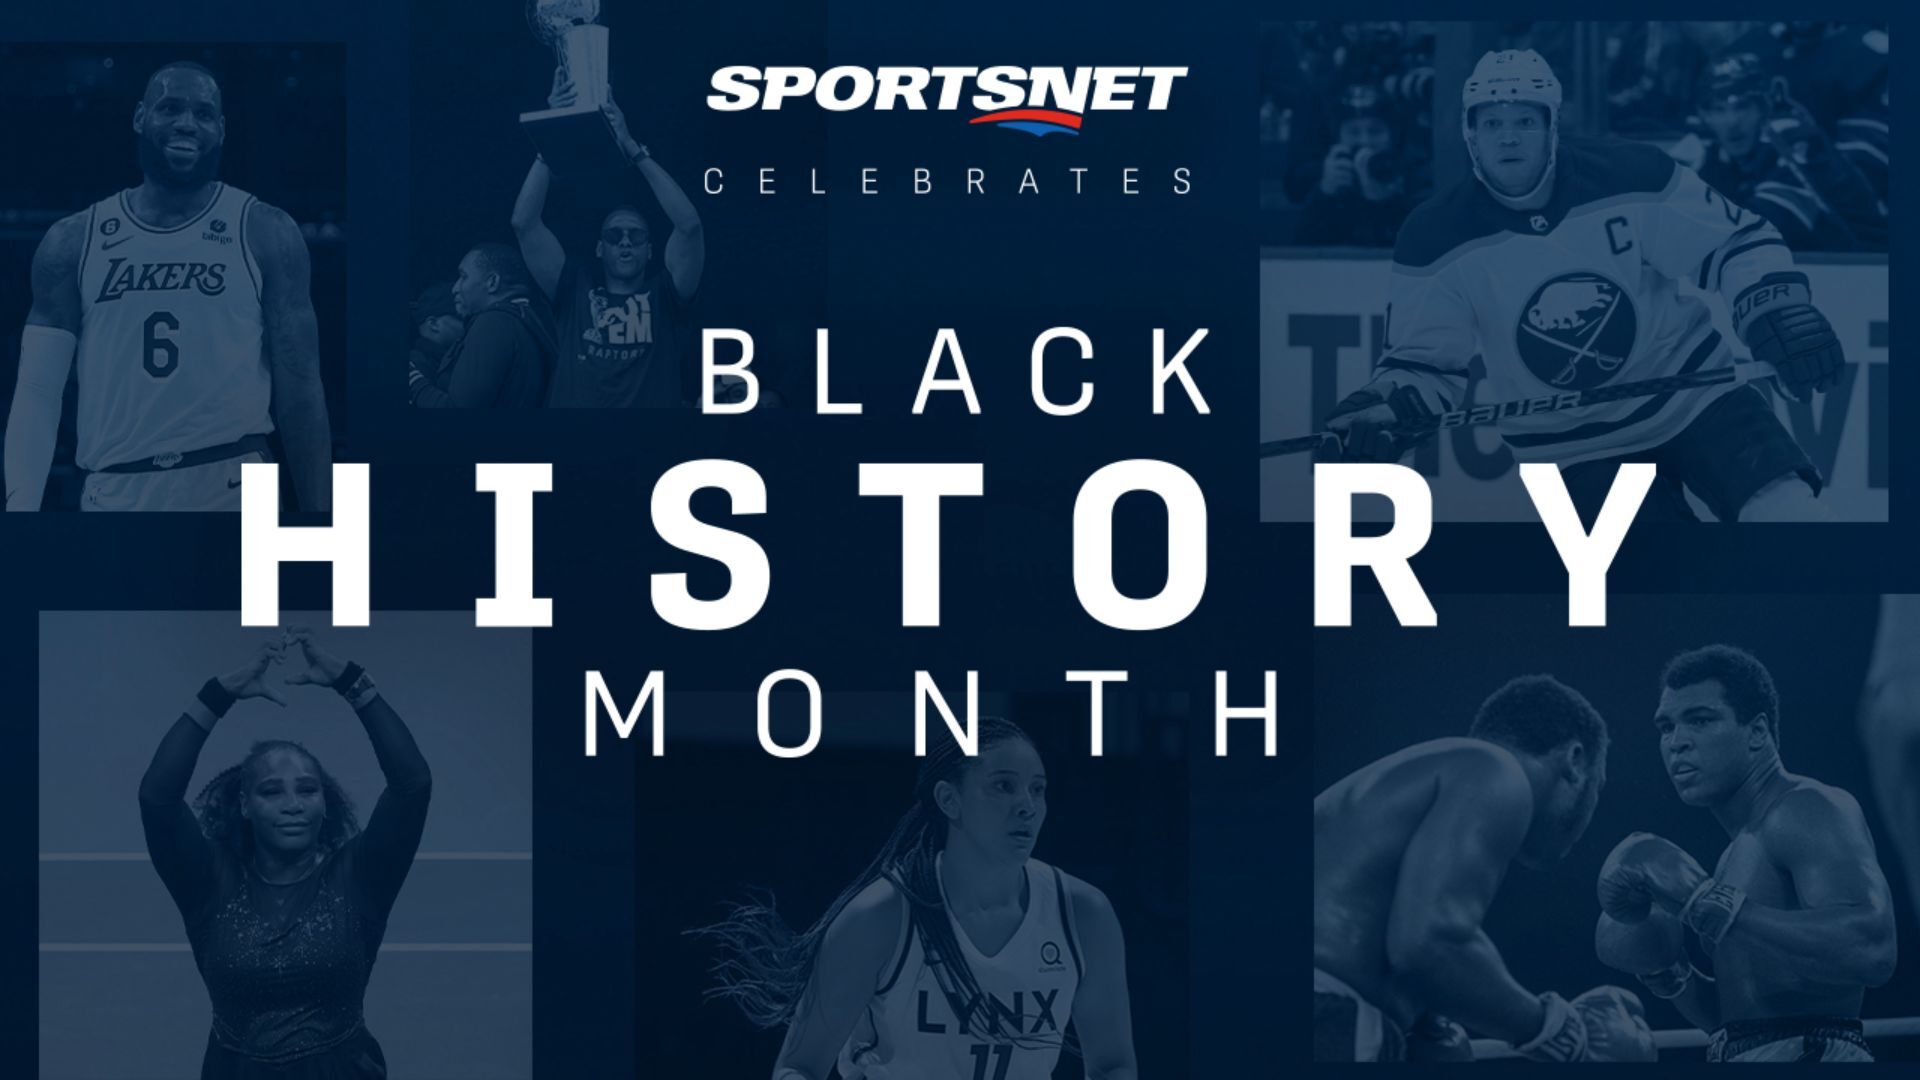 Everything YOU need to know about Black history month on Sportsnet